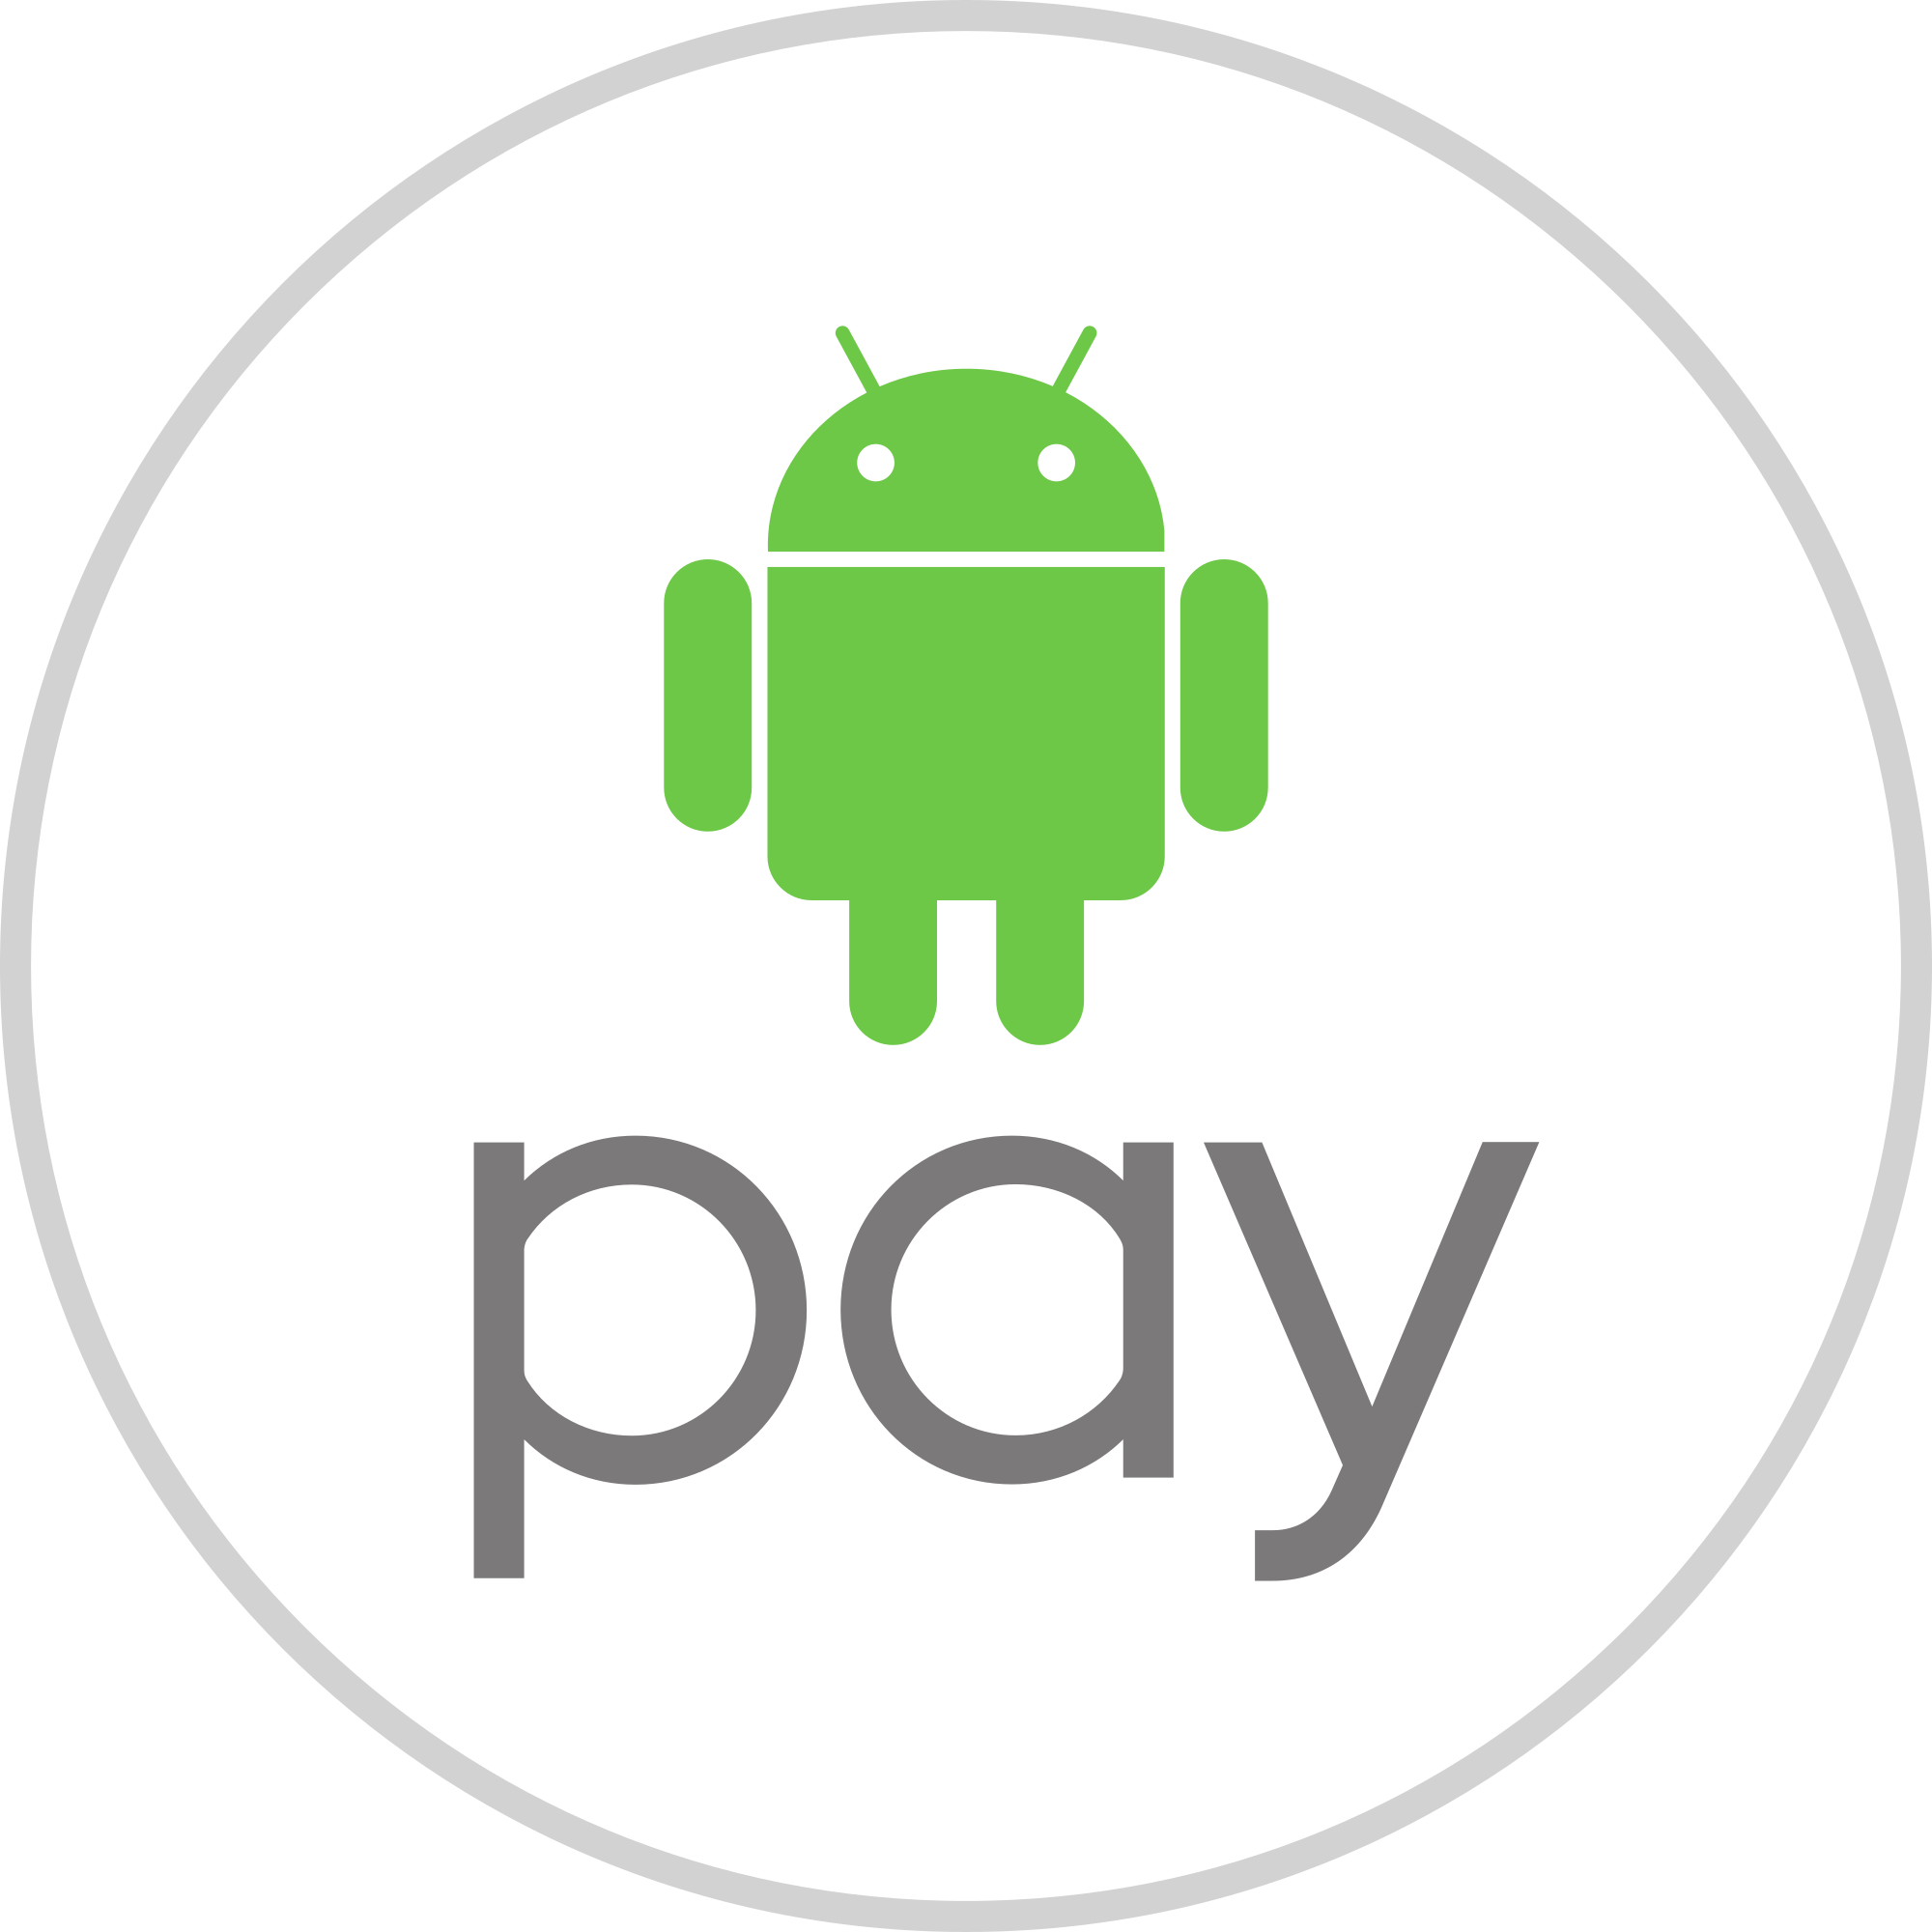 Android Pay Logo - File:Android Pay logo.svg - Wikimedia Commons